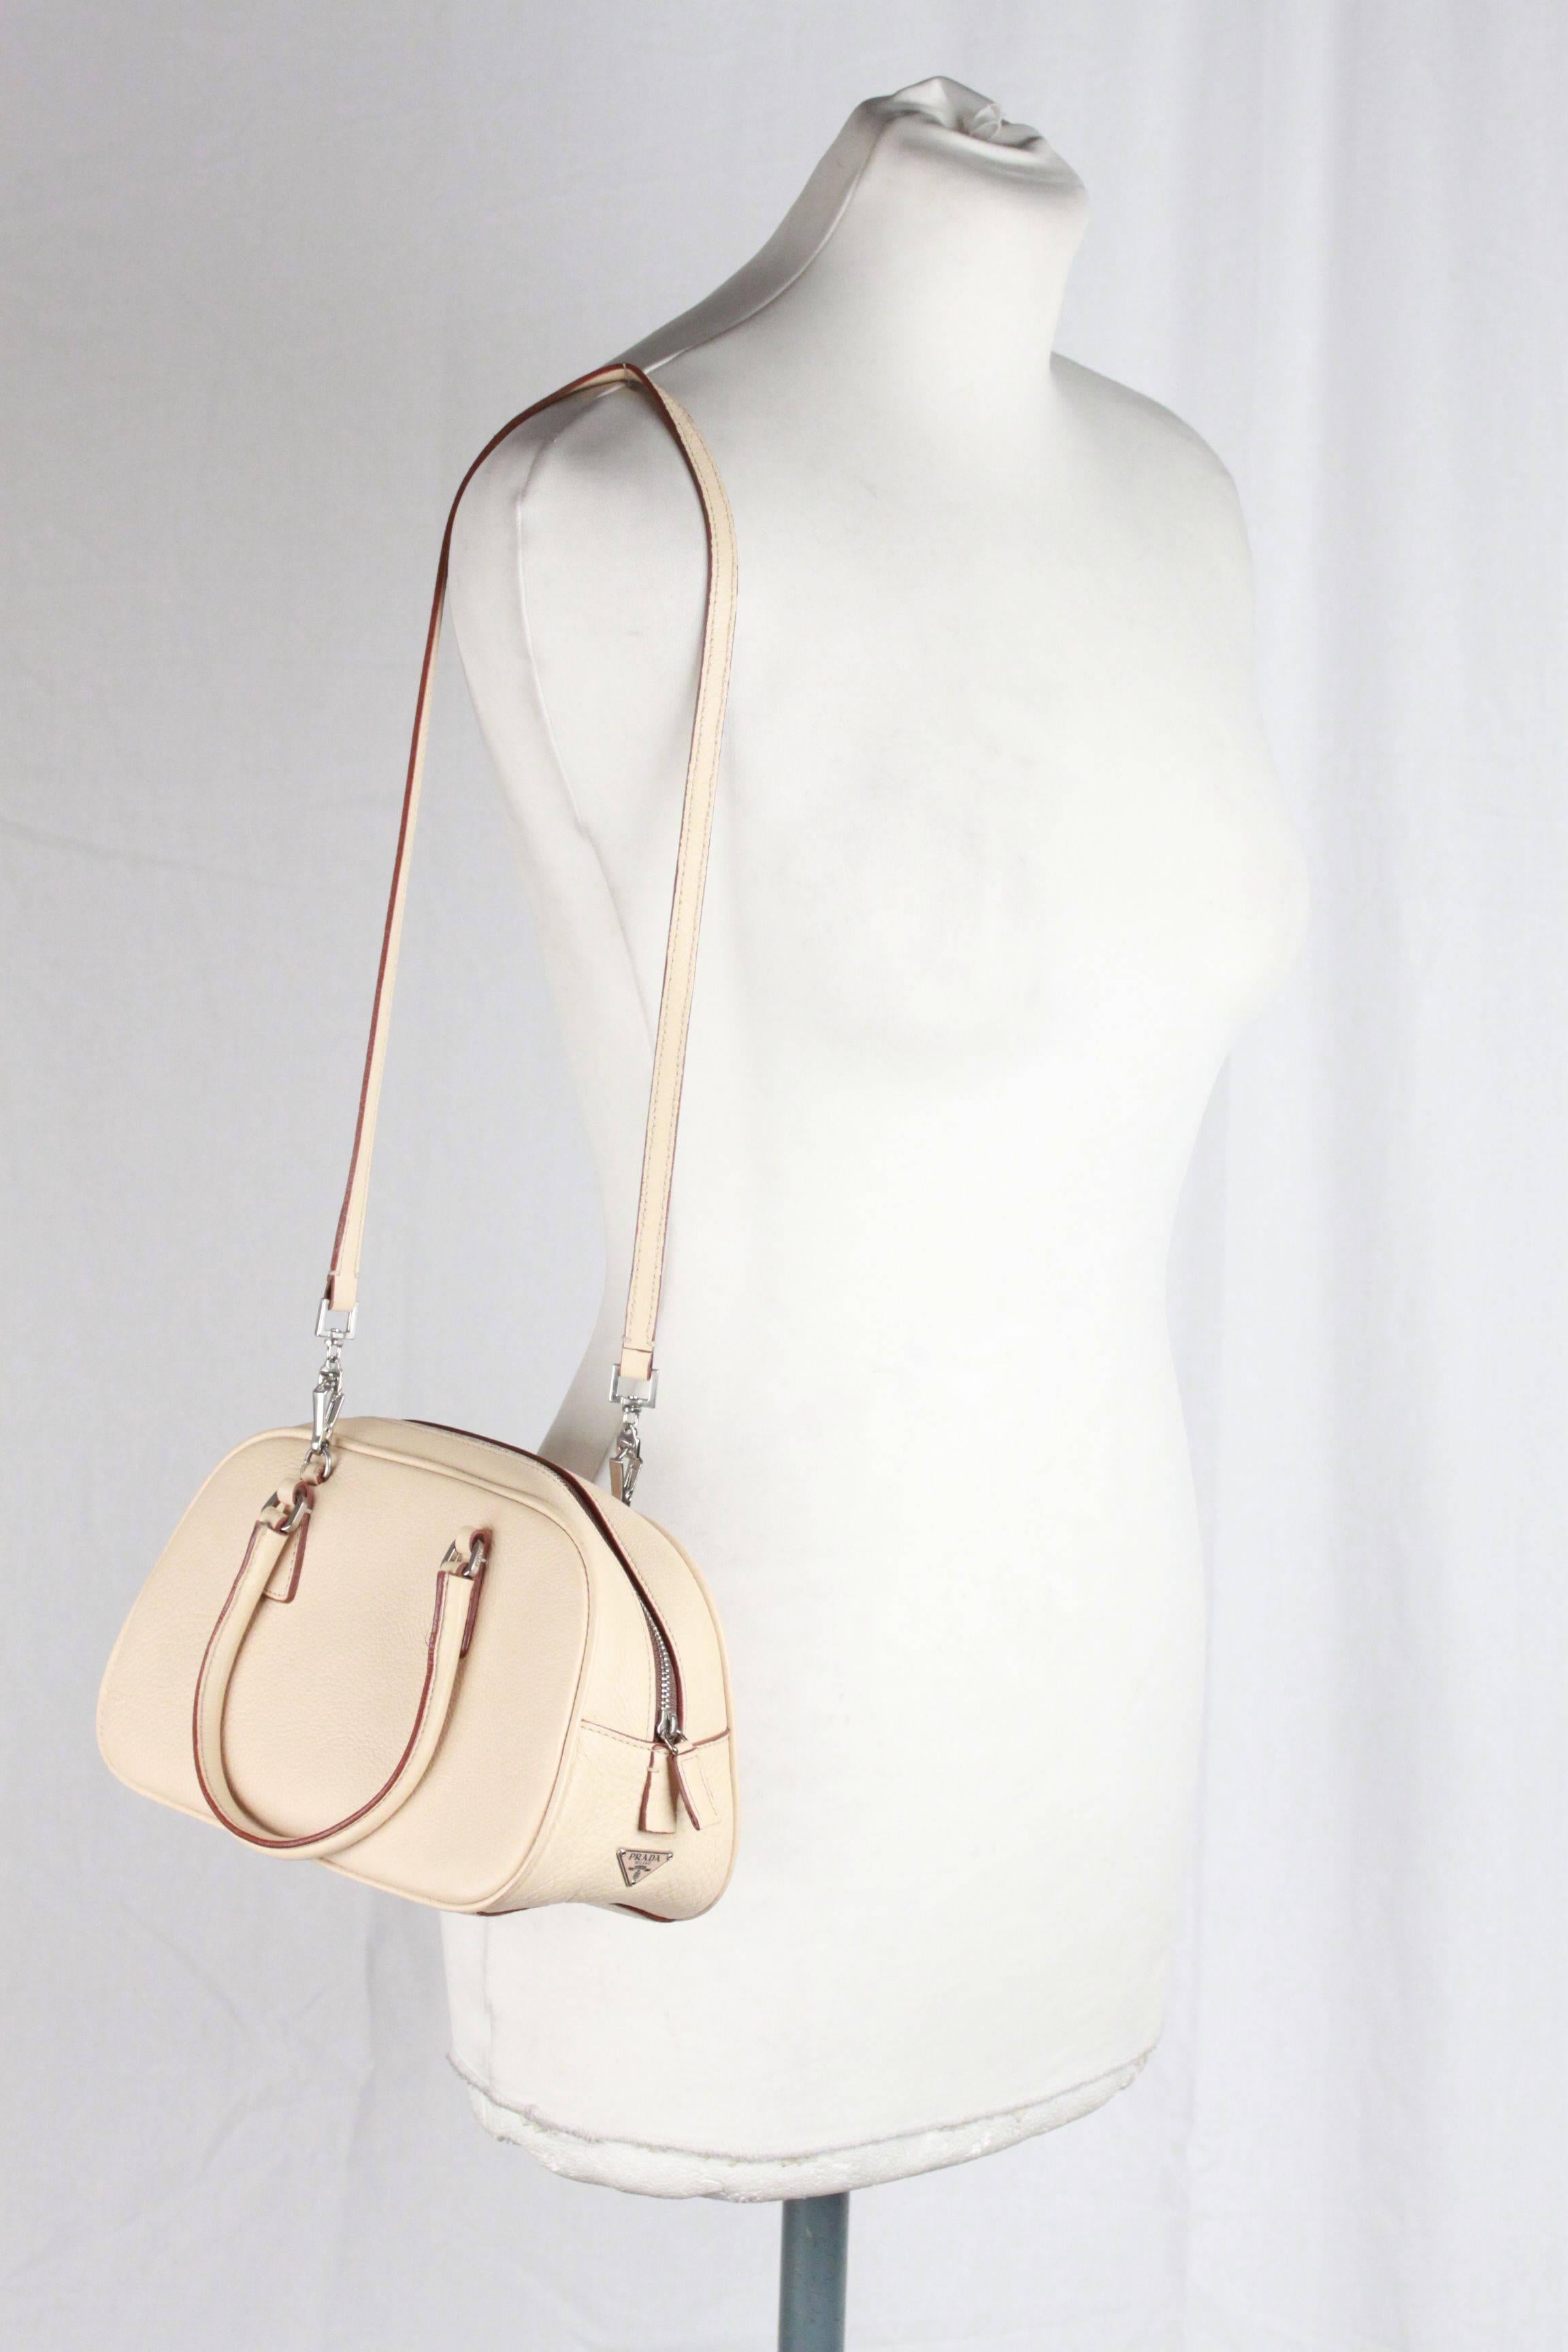 Elegant PRADA top handles  bag/handbag mod. BL0063, designed in Beige 'Daino Sport' leather. It features a removable shoulder strap and double top handles. The interior is fully lined withtan leather. 1 side zip pocket inside Four metal bottom feet